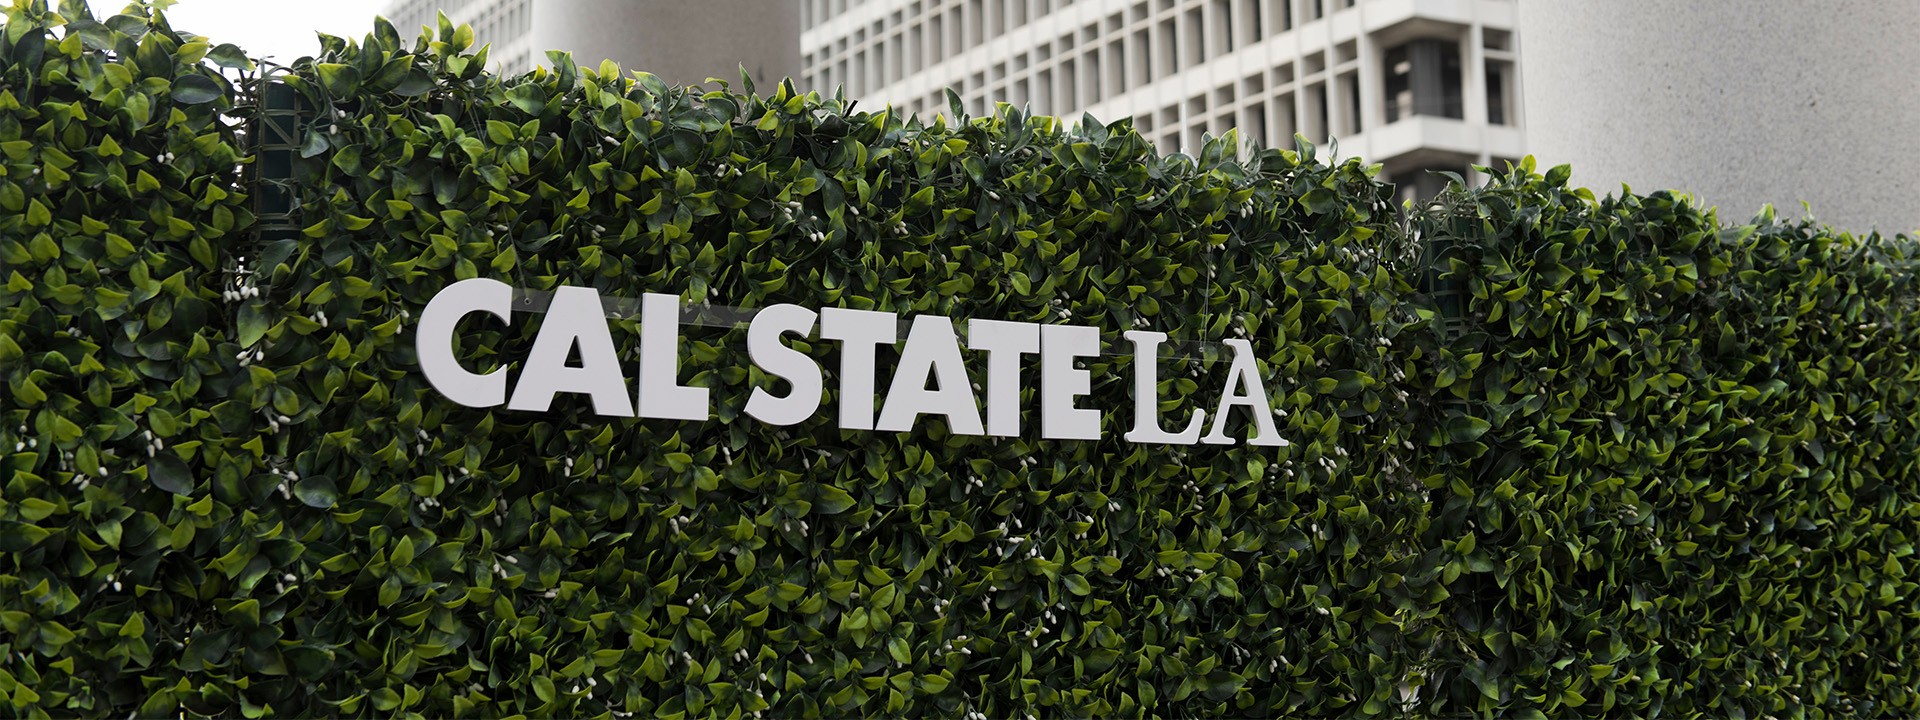 hedge with cal state la plastic lettering